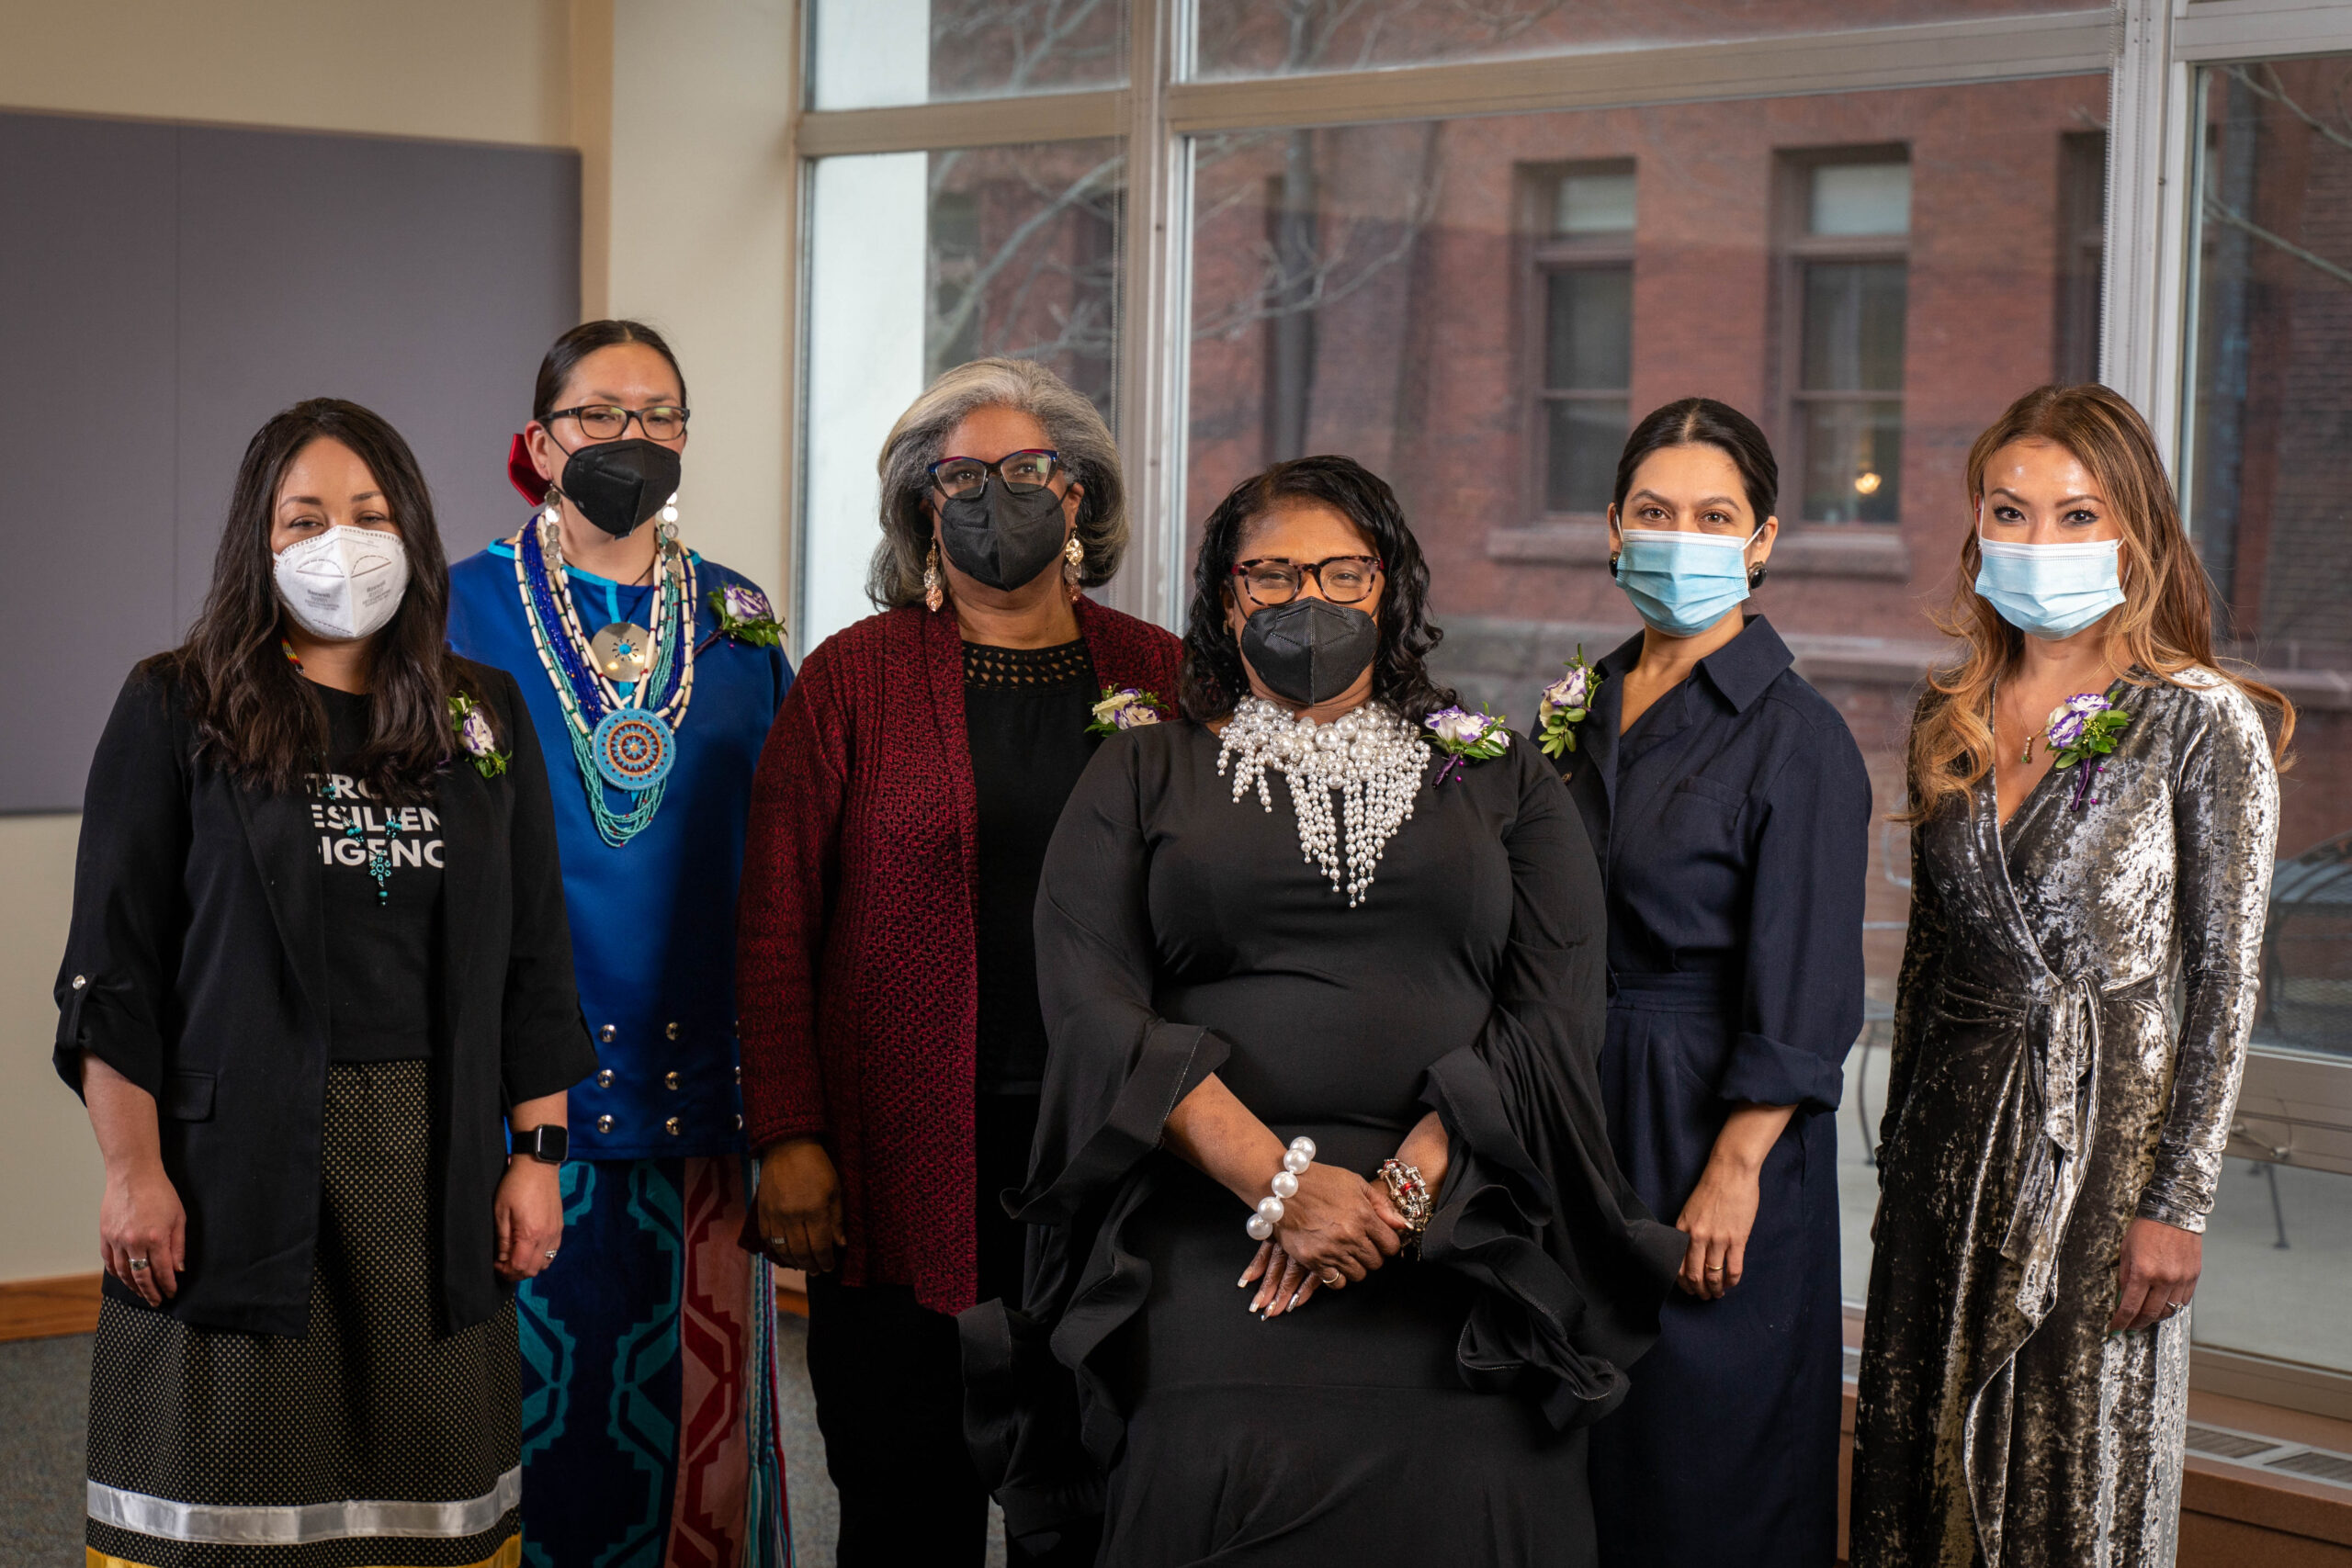 Six women of color in formal attire and face masks pose for a group photo.